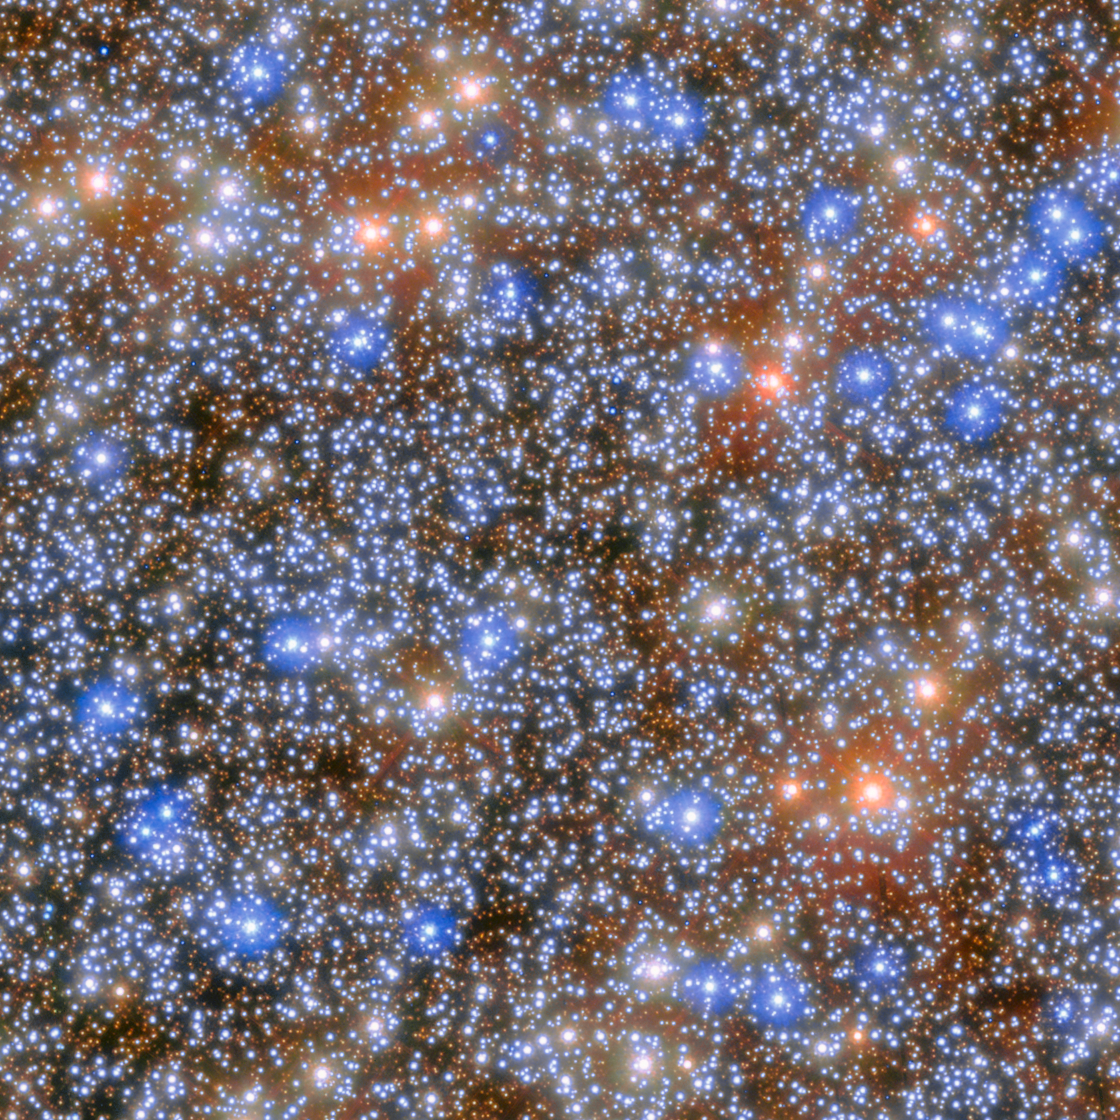 The central region of the globular star cluster Omega Centauri. It appears as a collection of myriad stars colored red, white, and blue on the black background of space.